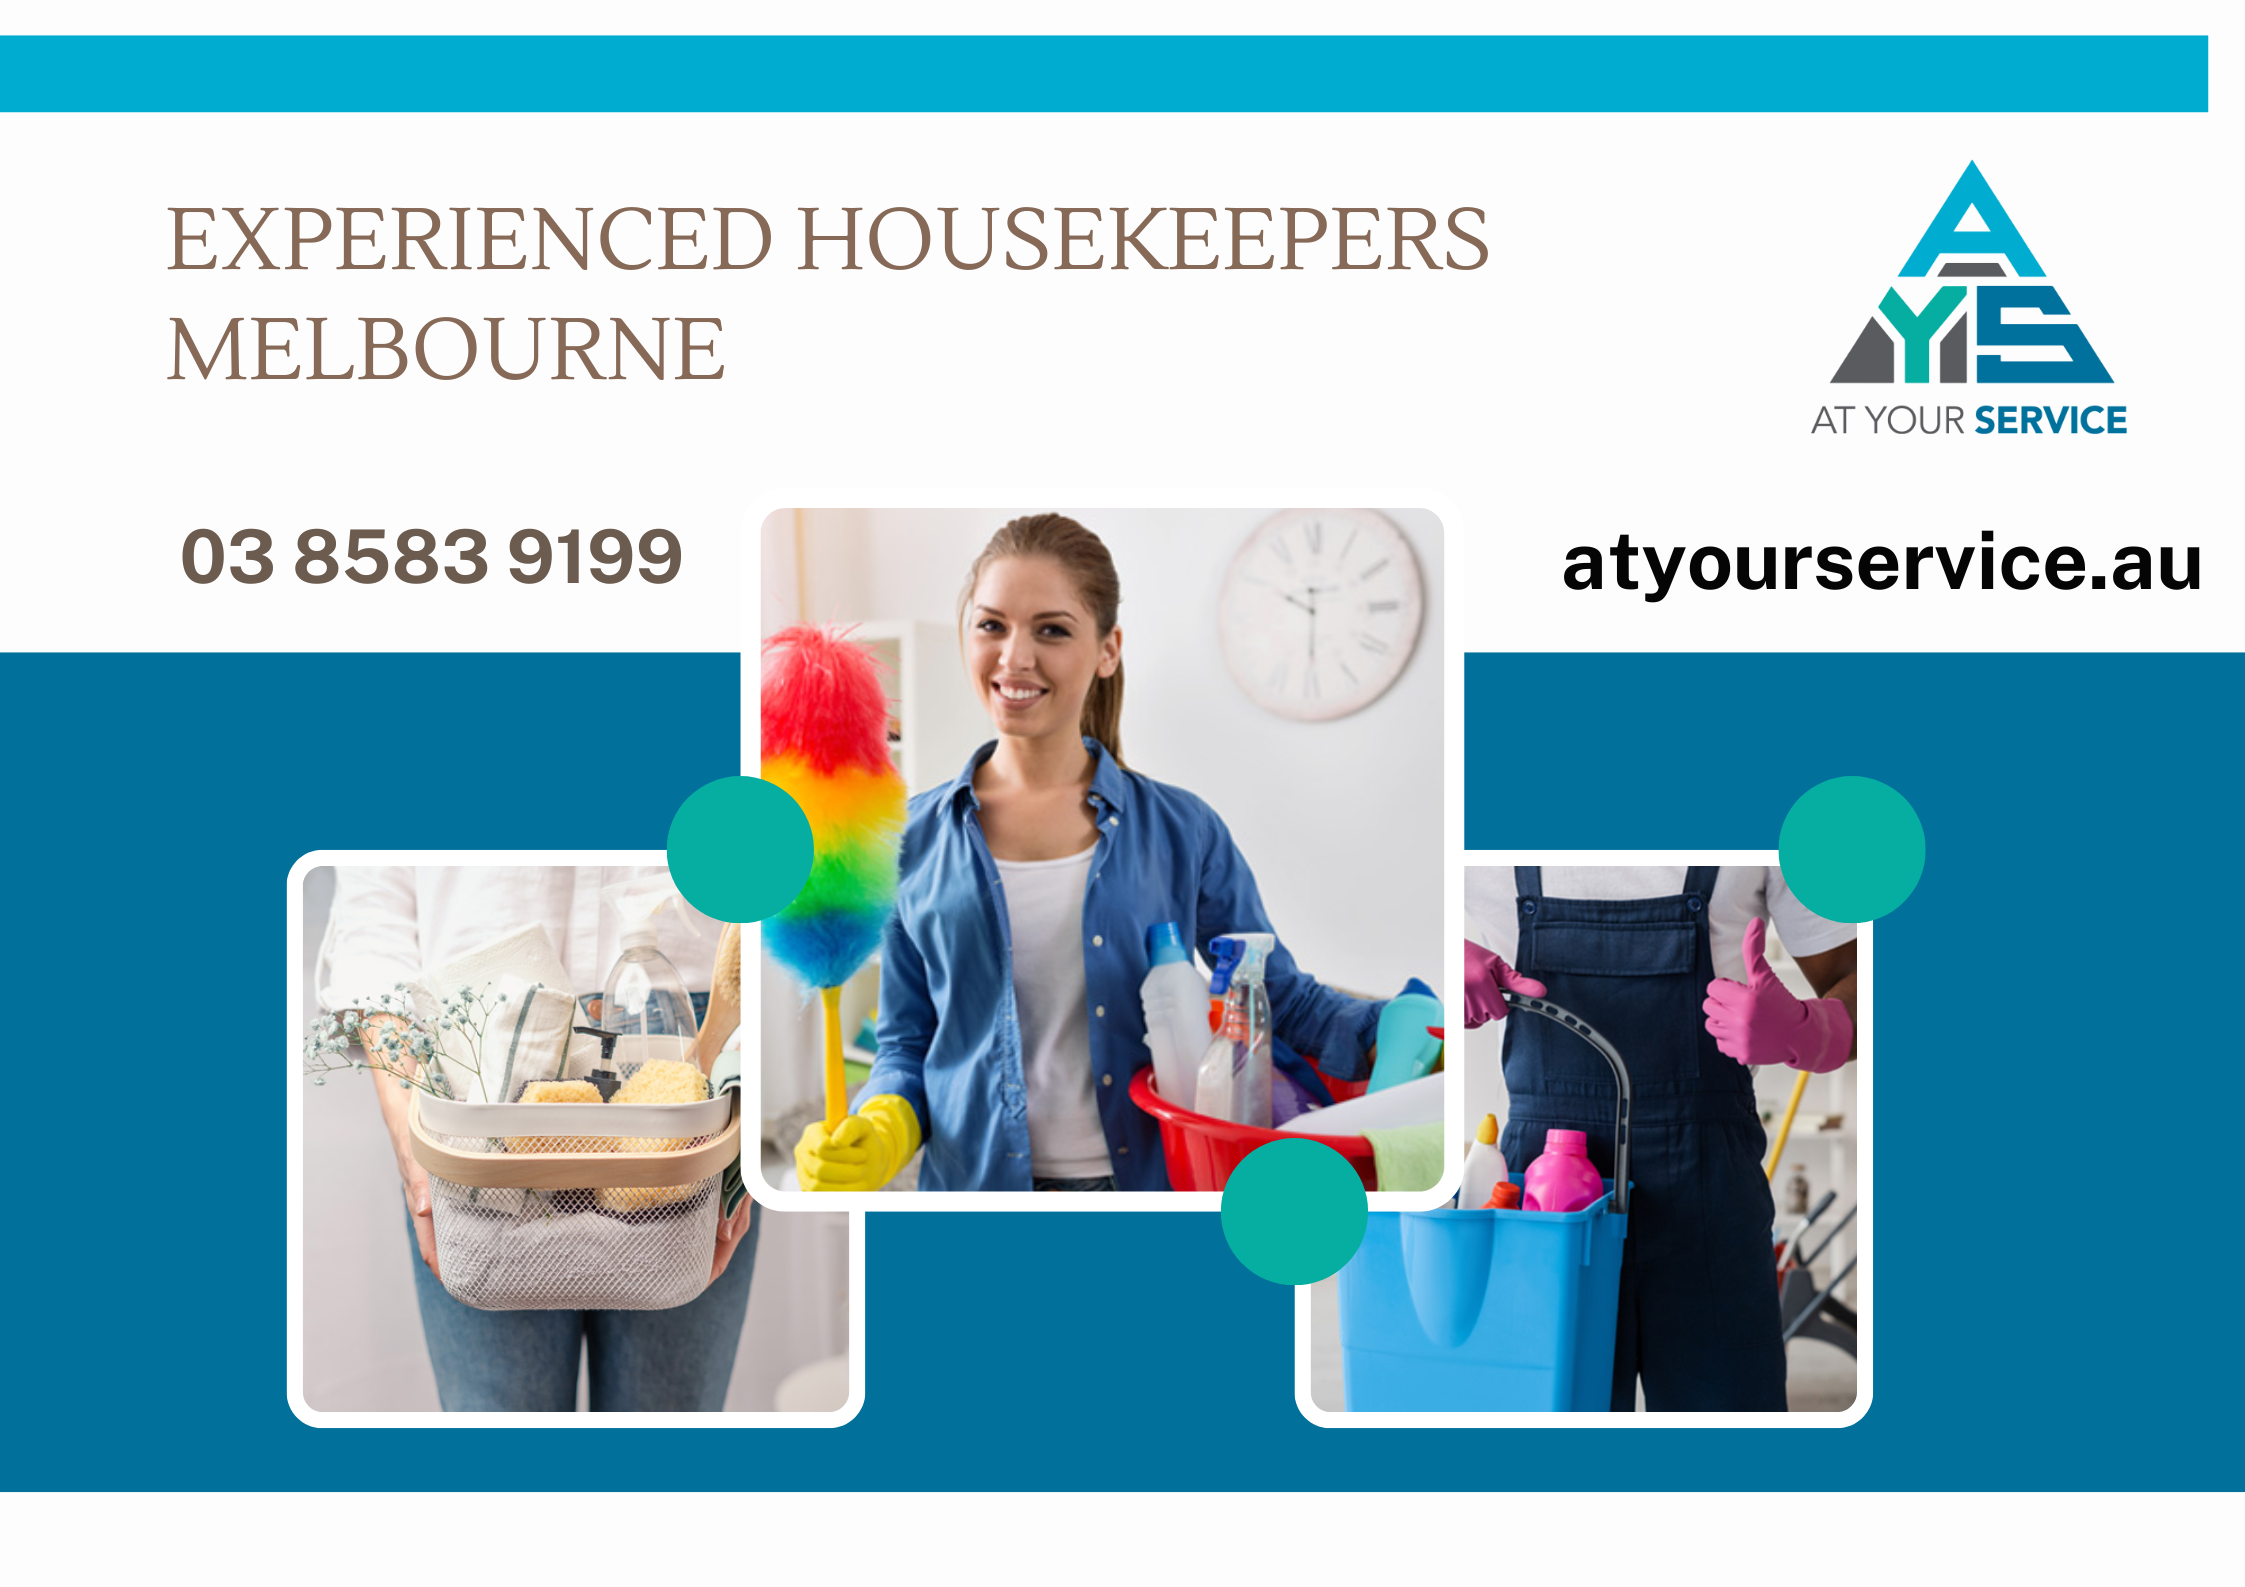 Hire The Most Experienced Melbourne Housekeepers By At Your Service - Image on Pasteboard